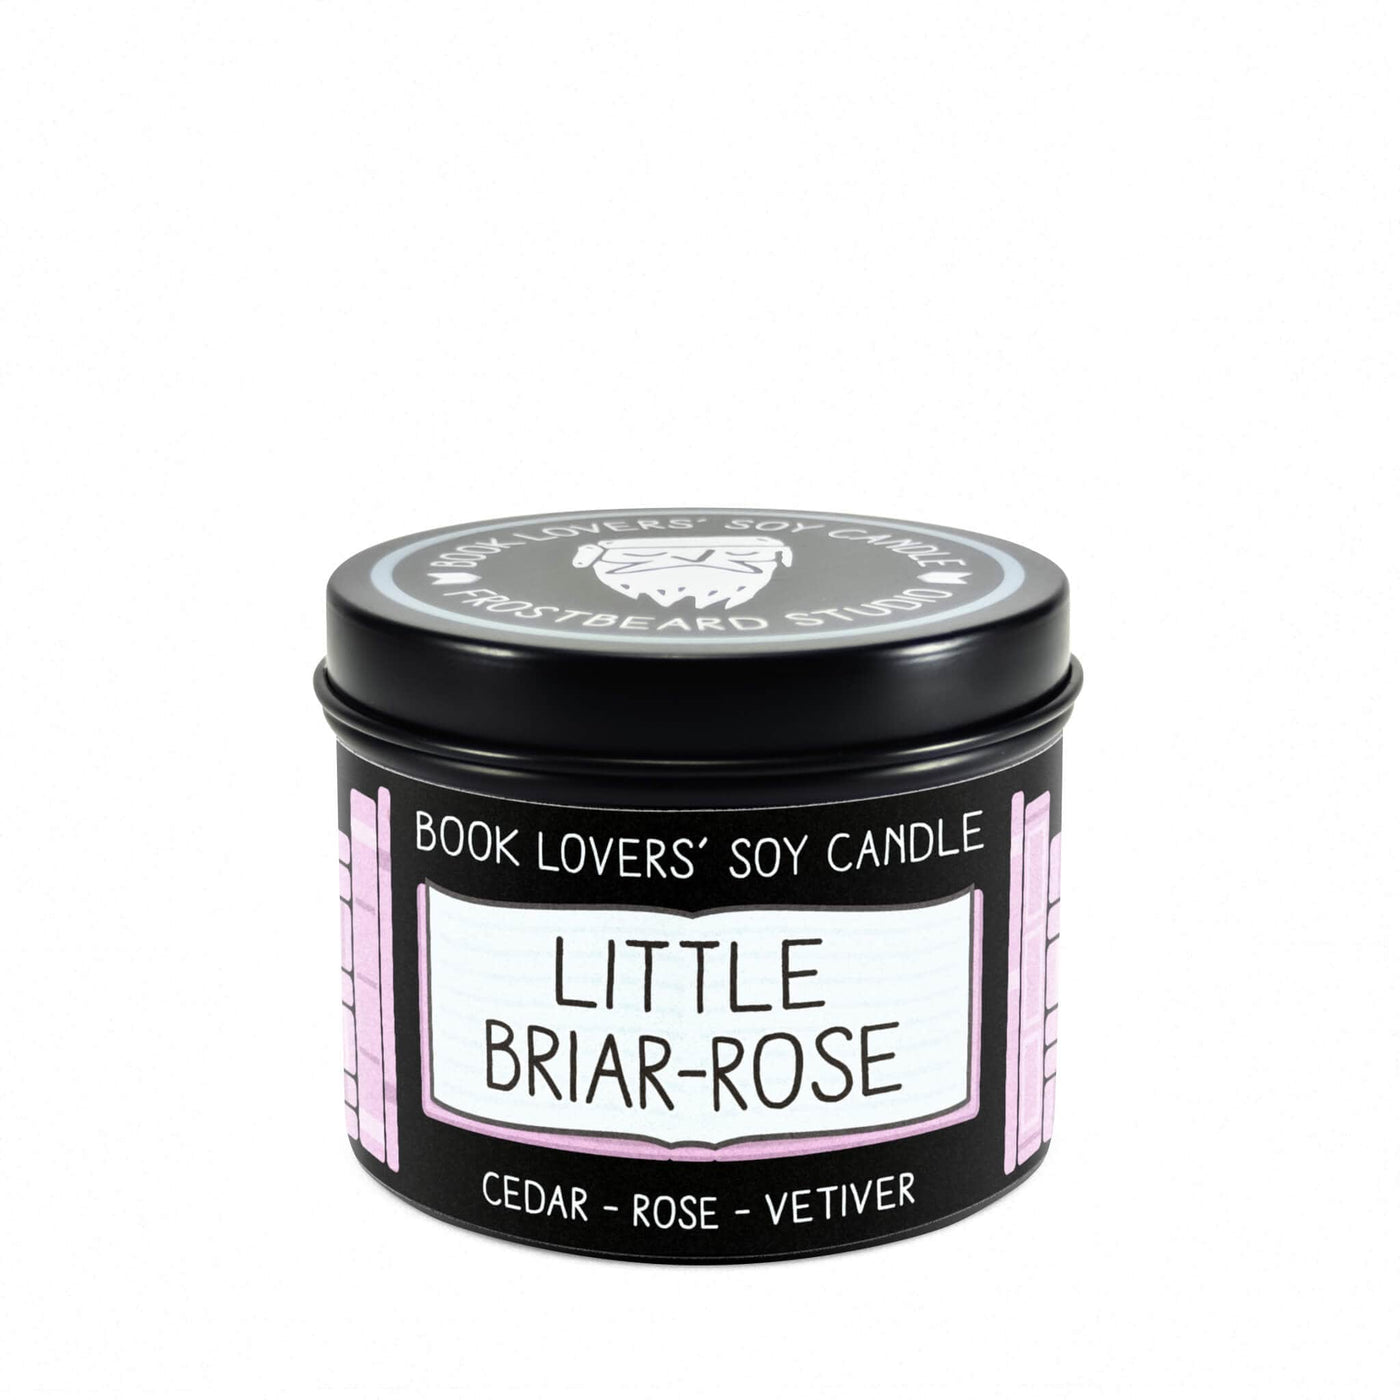 Little Briar-Rose  -  4 oz Tin  -  Book Lovers' Soy Candle  -  Frostbeard Studio